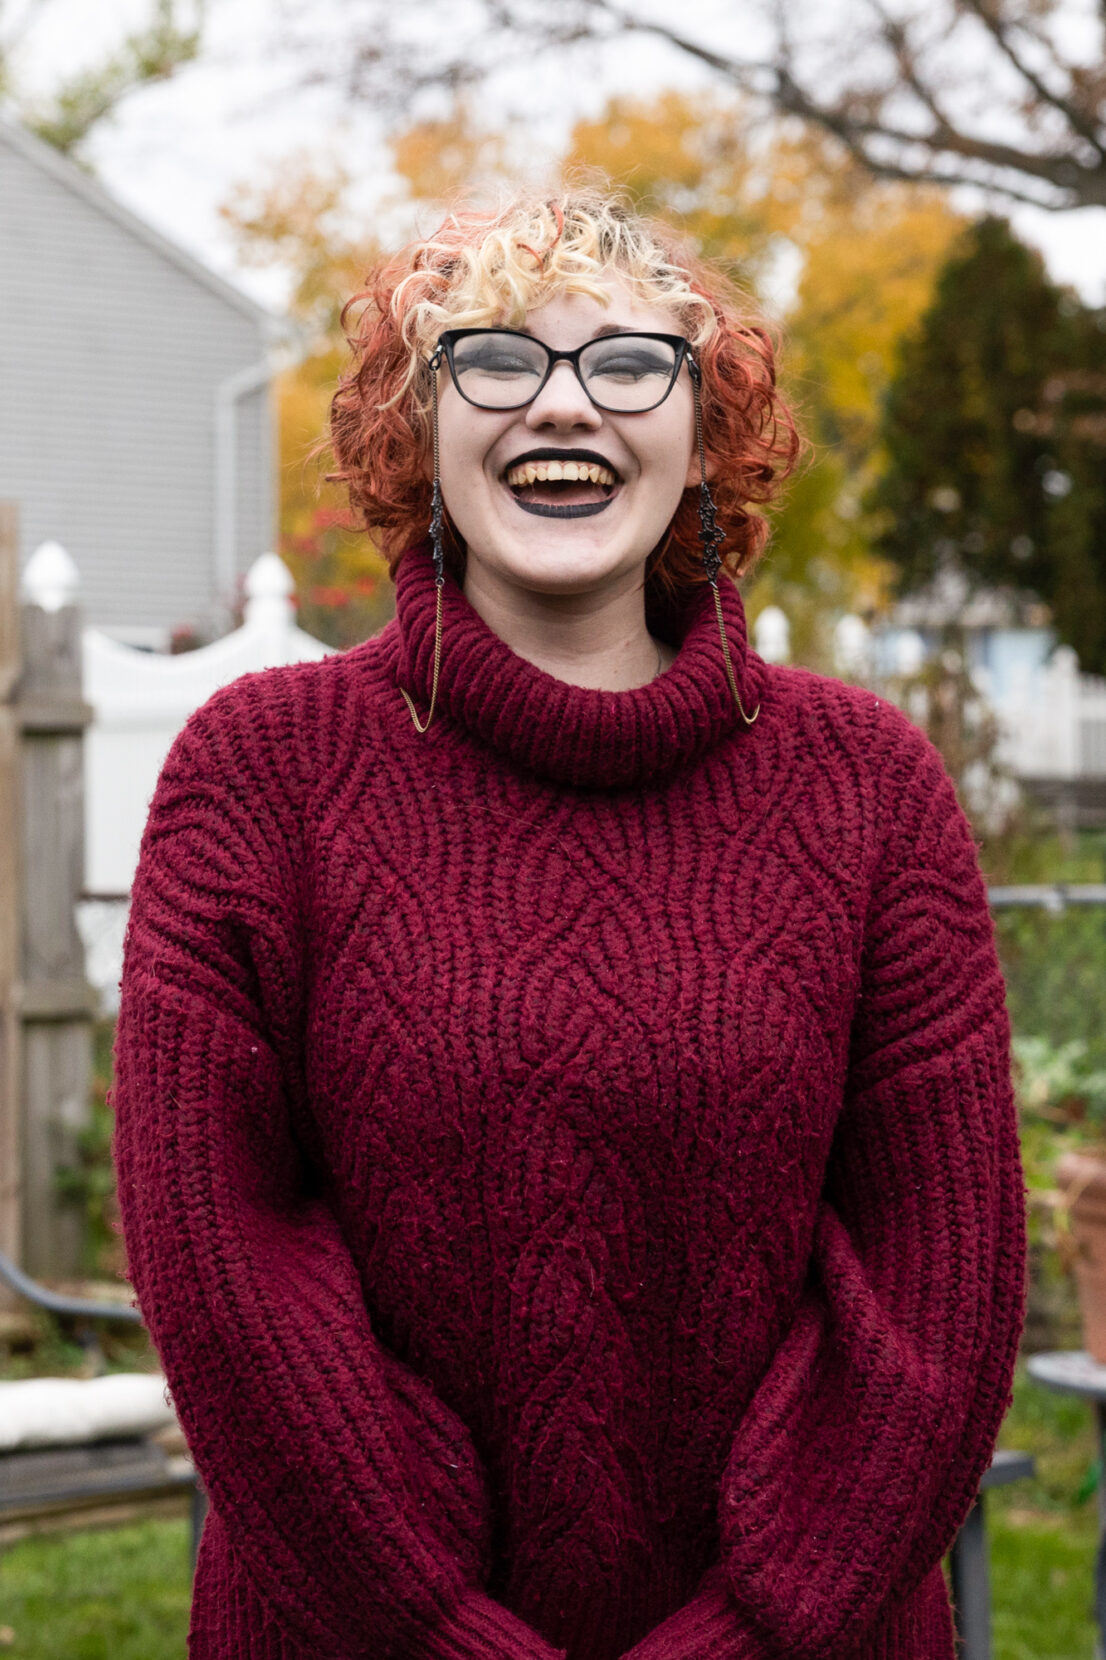 A portrait of a laughing woman with curly orange hair and glasses.